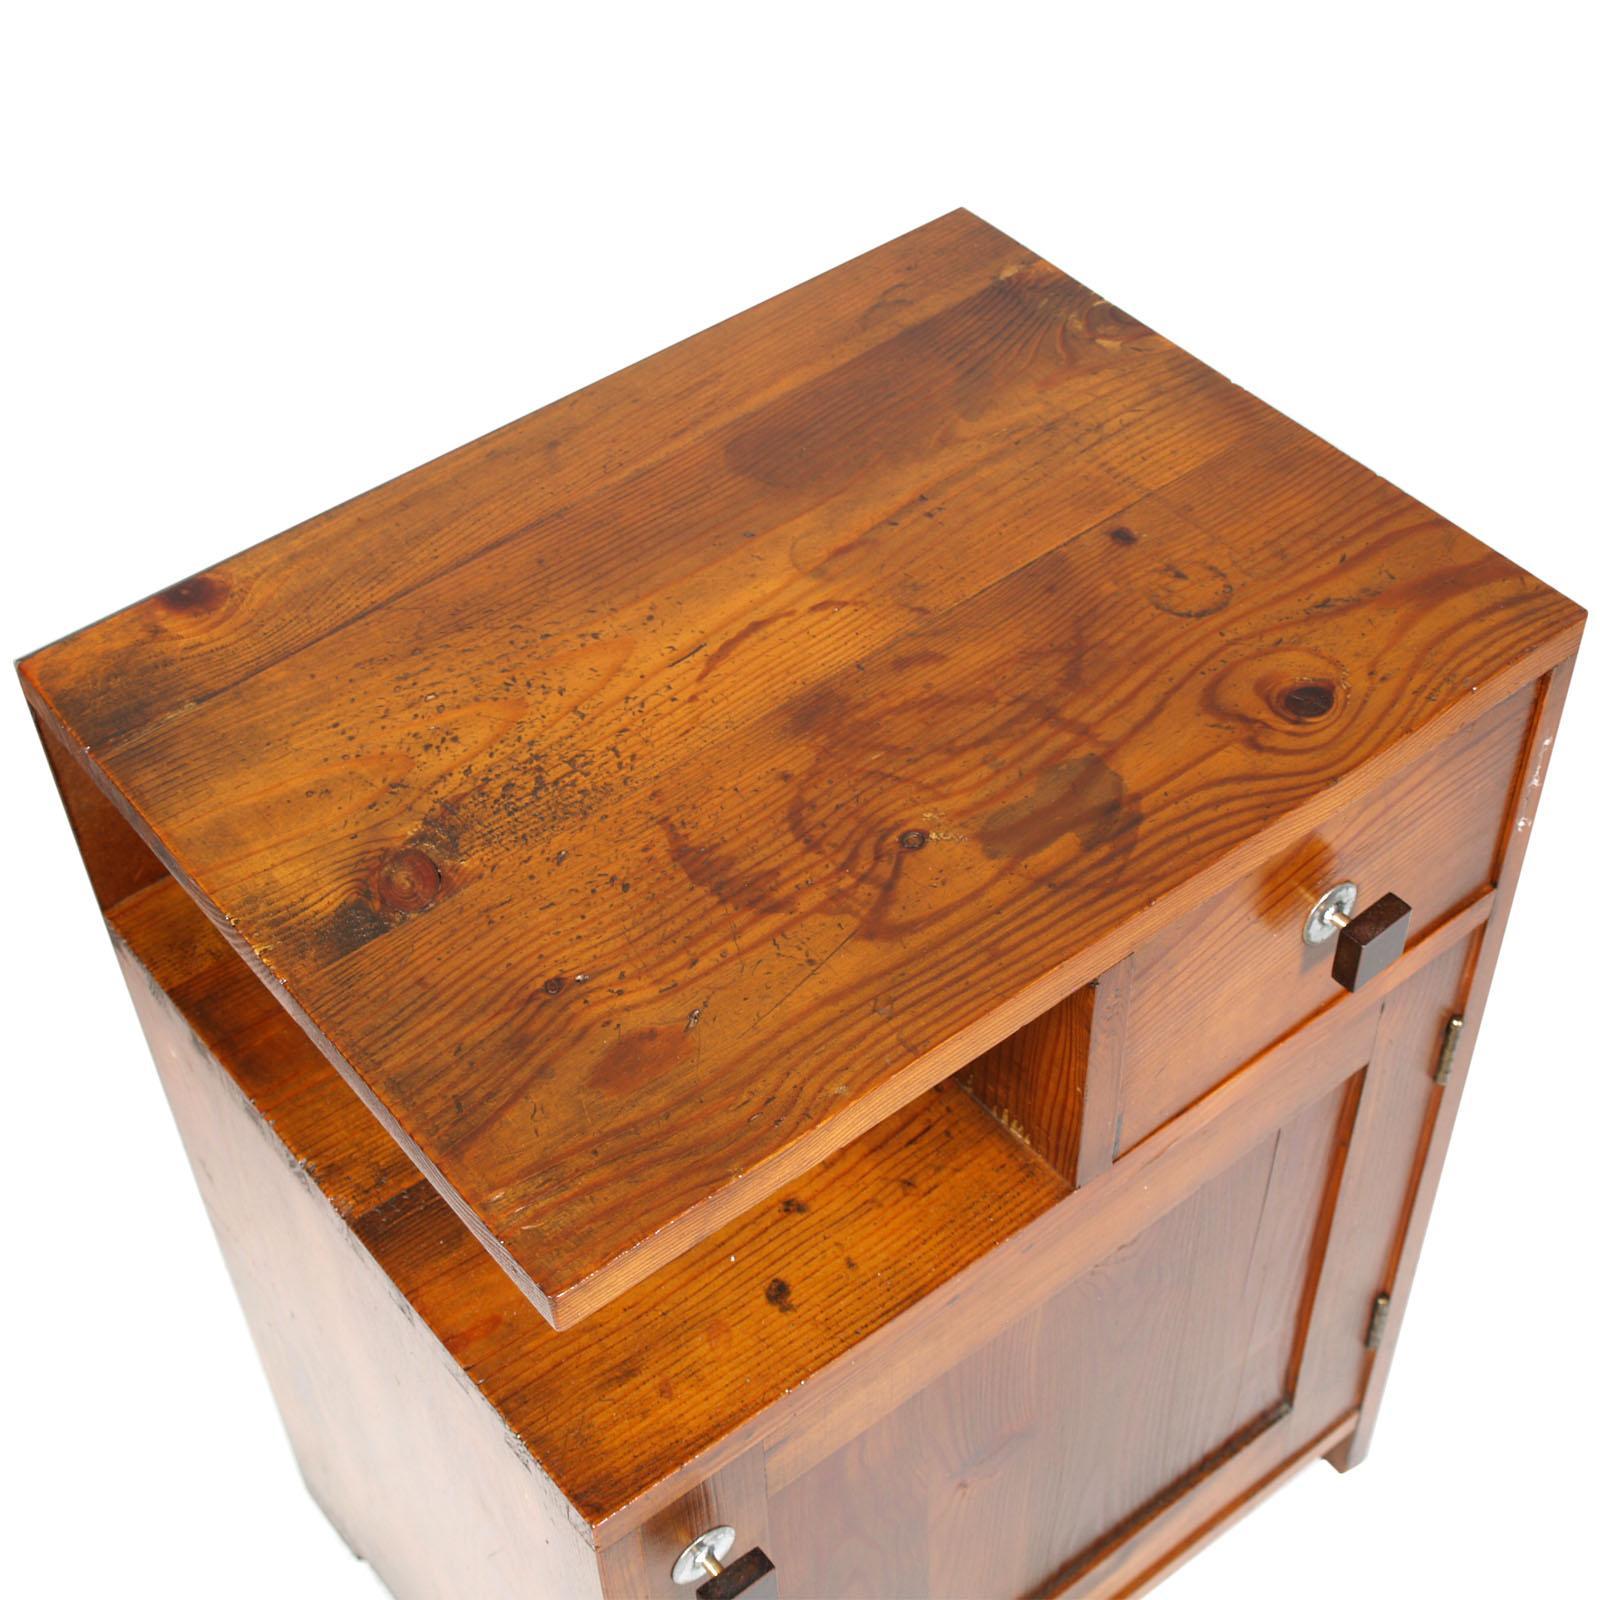 Tyrolean nightstand period Art Deco in massive larch, polished to wax with handles in bakelite, original of the time

Measures cm: H 65, W 49, D 37.